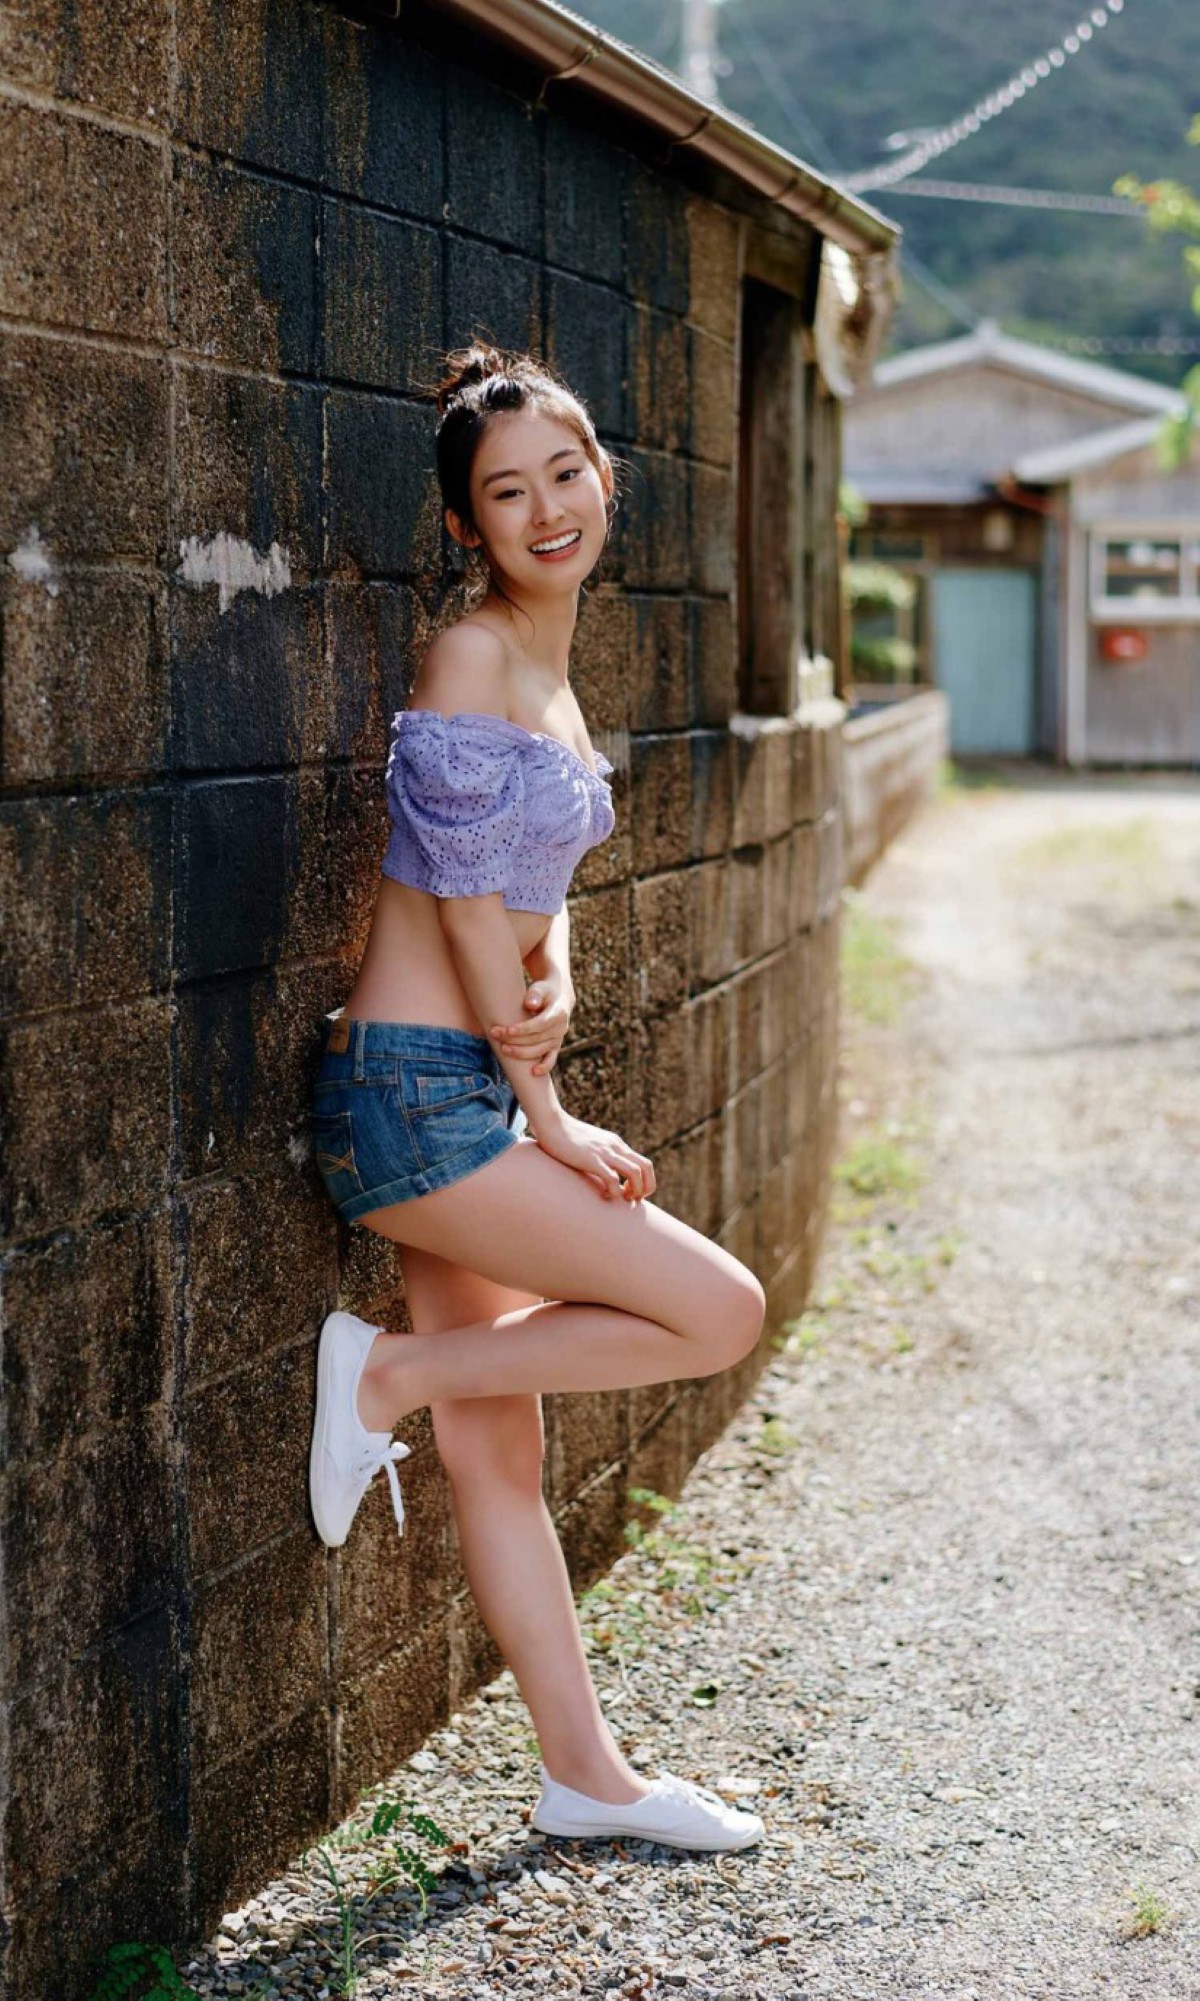 Photobook Ayaka Imoto 井本彩花 The Heroine Is Dignified And Beautiful 17 Years Old 0037 6214548753.jpg